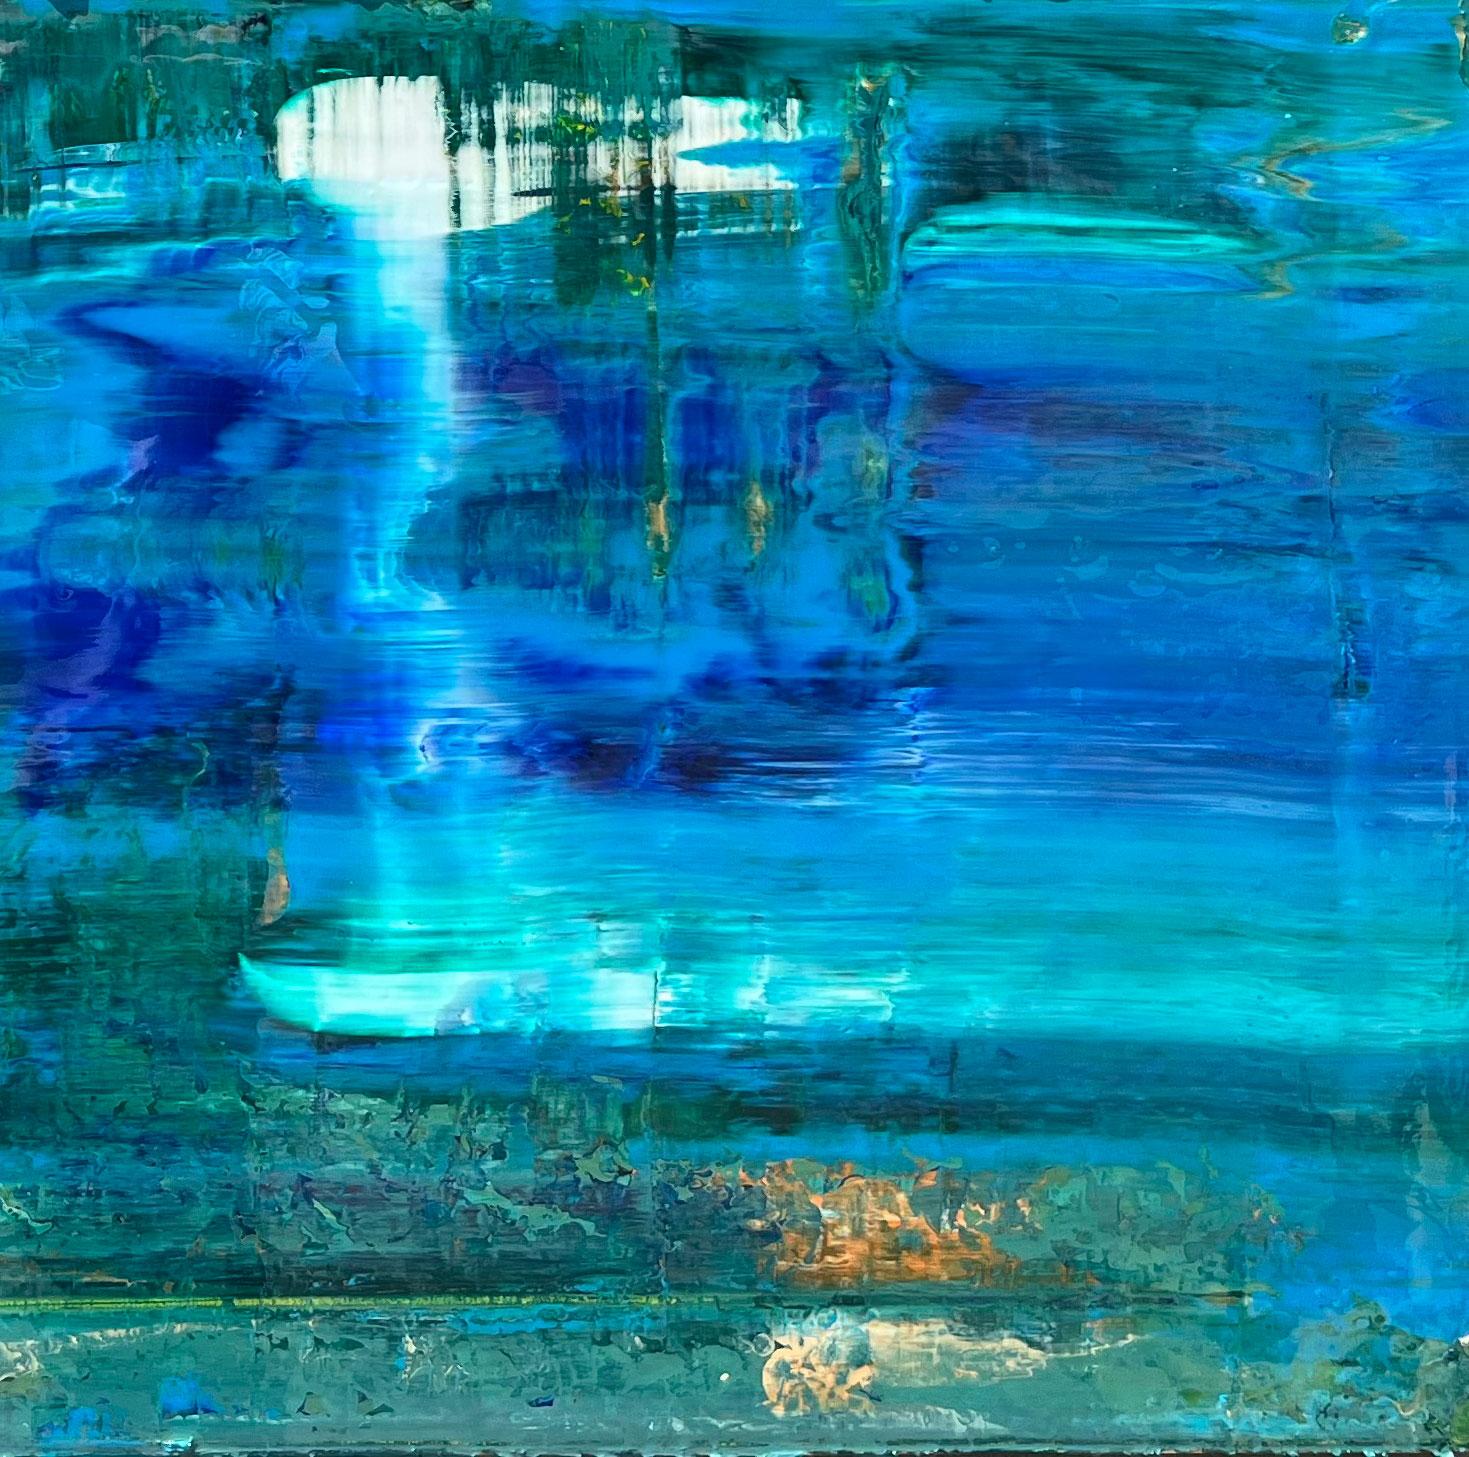 Climate Change - Rio de Janeiro - Blue Abstract Painting by Antonio Franchi